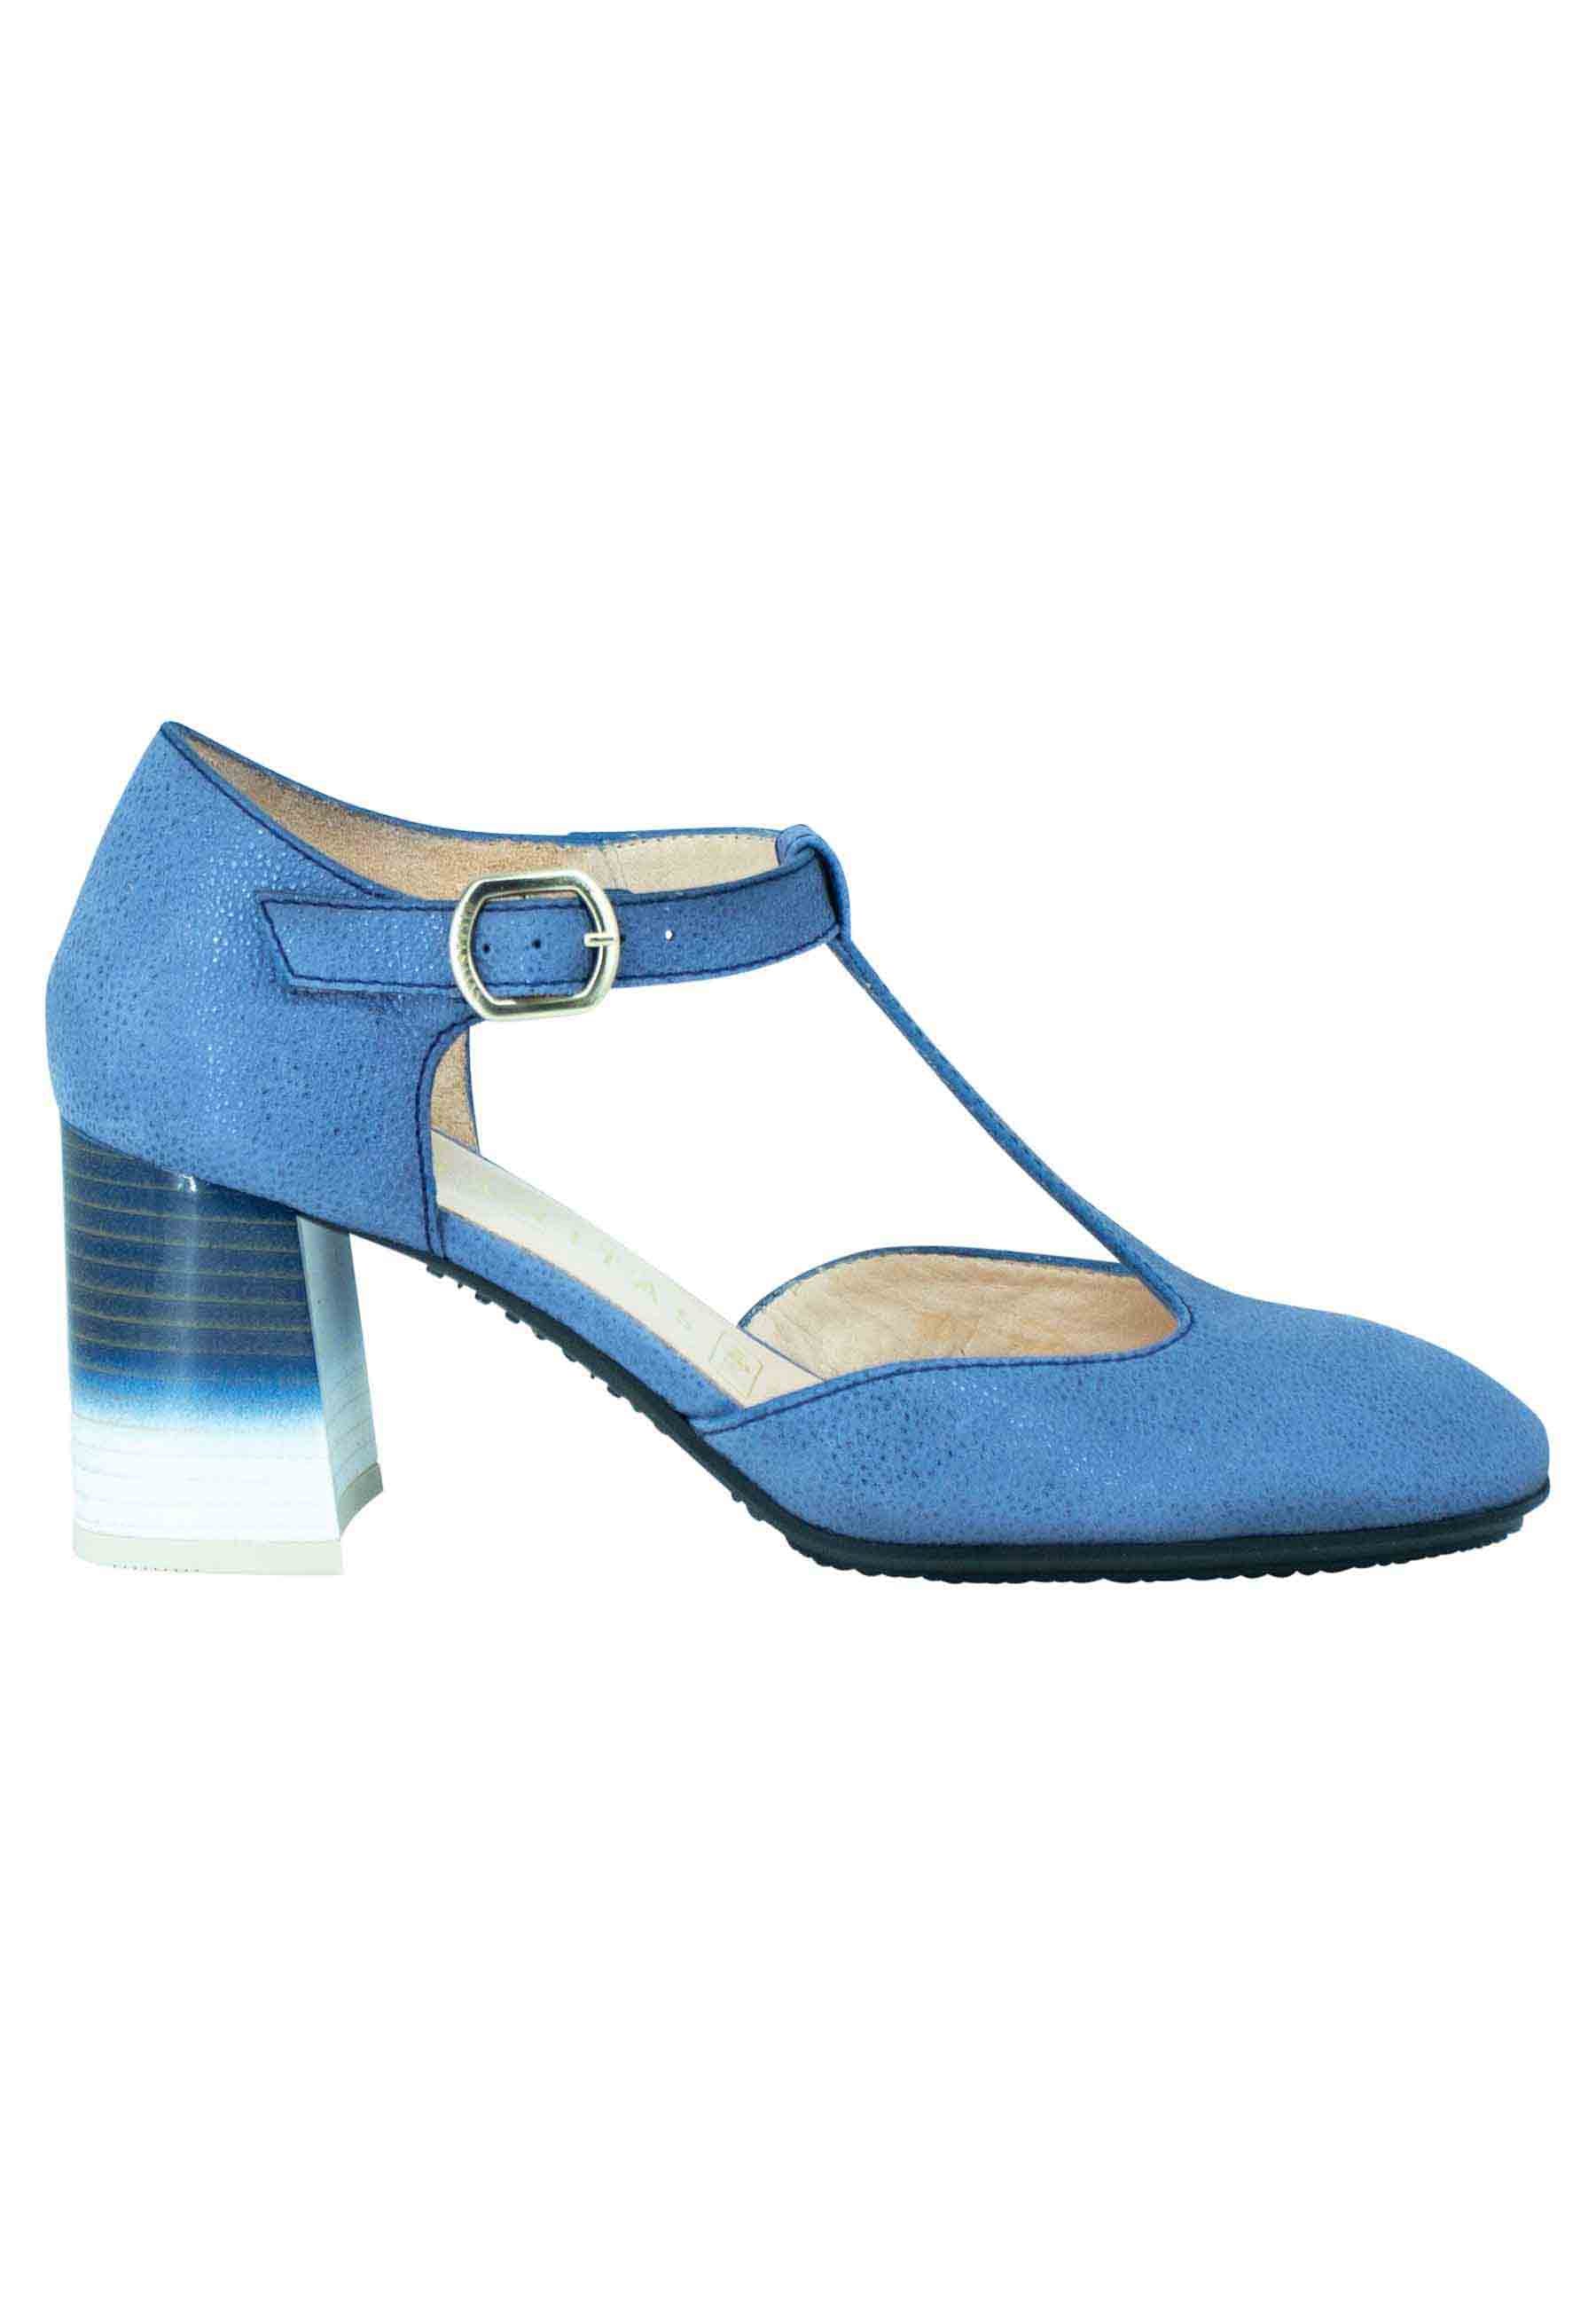 Women's Australia decollete in blue leather with closed heel and strap